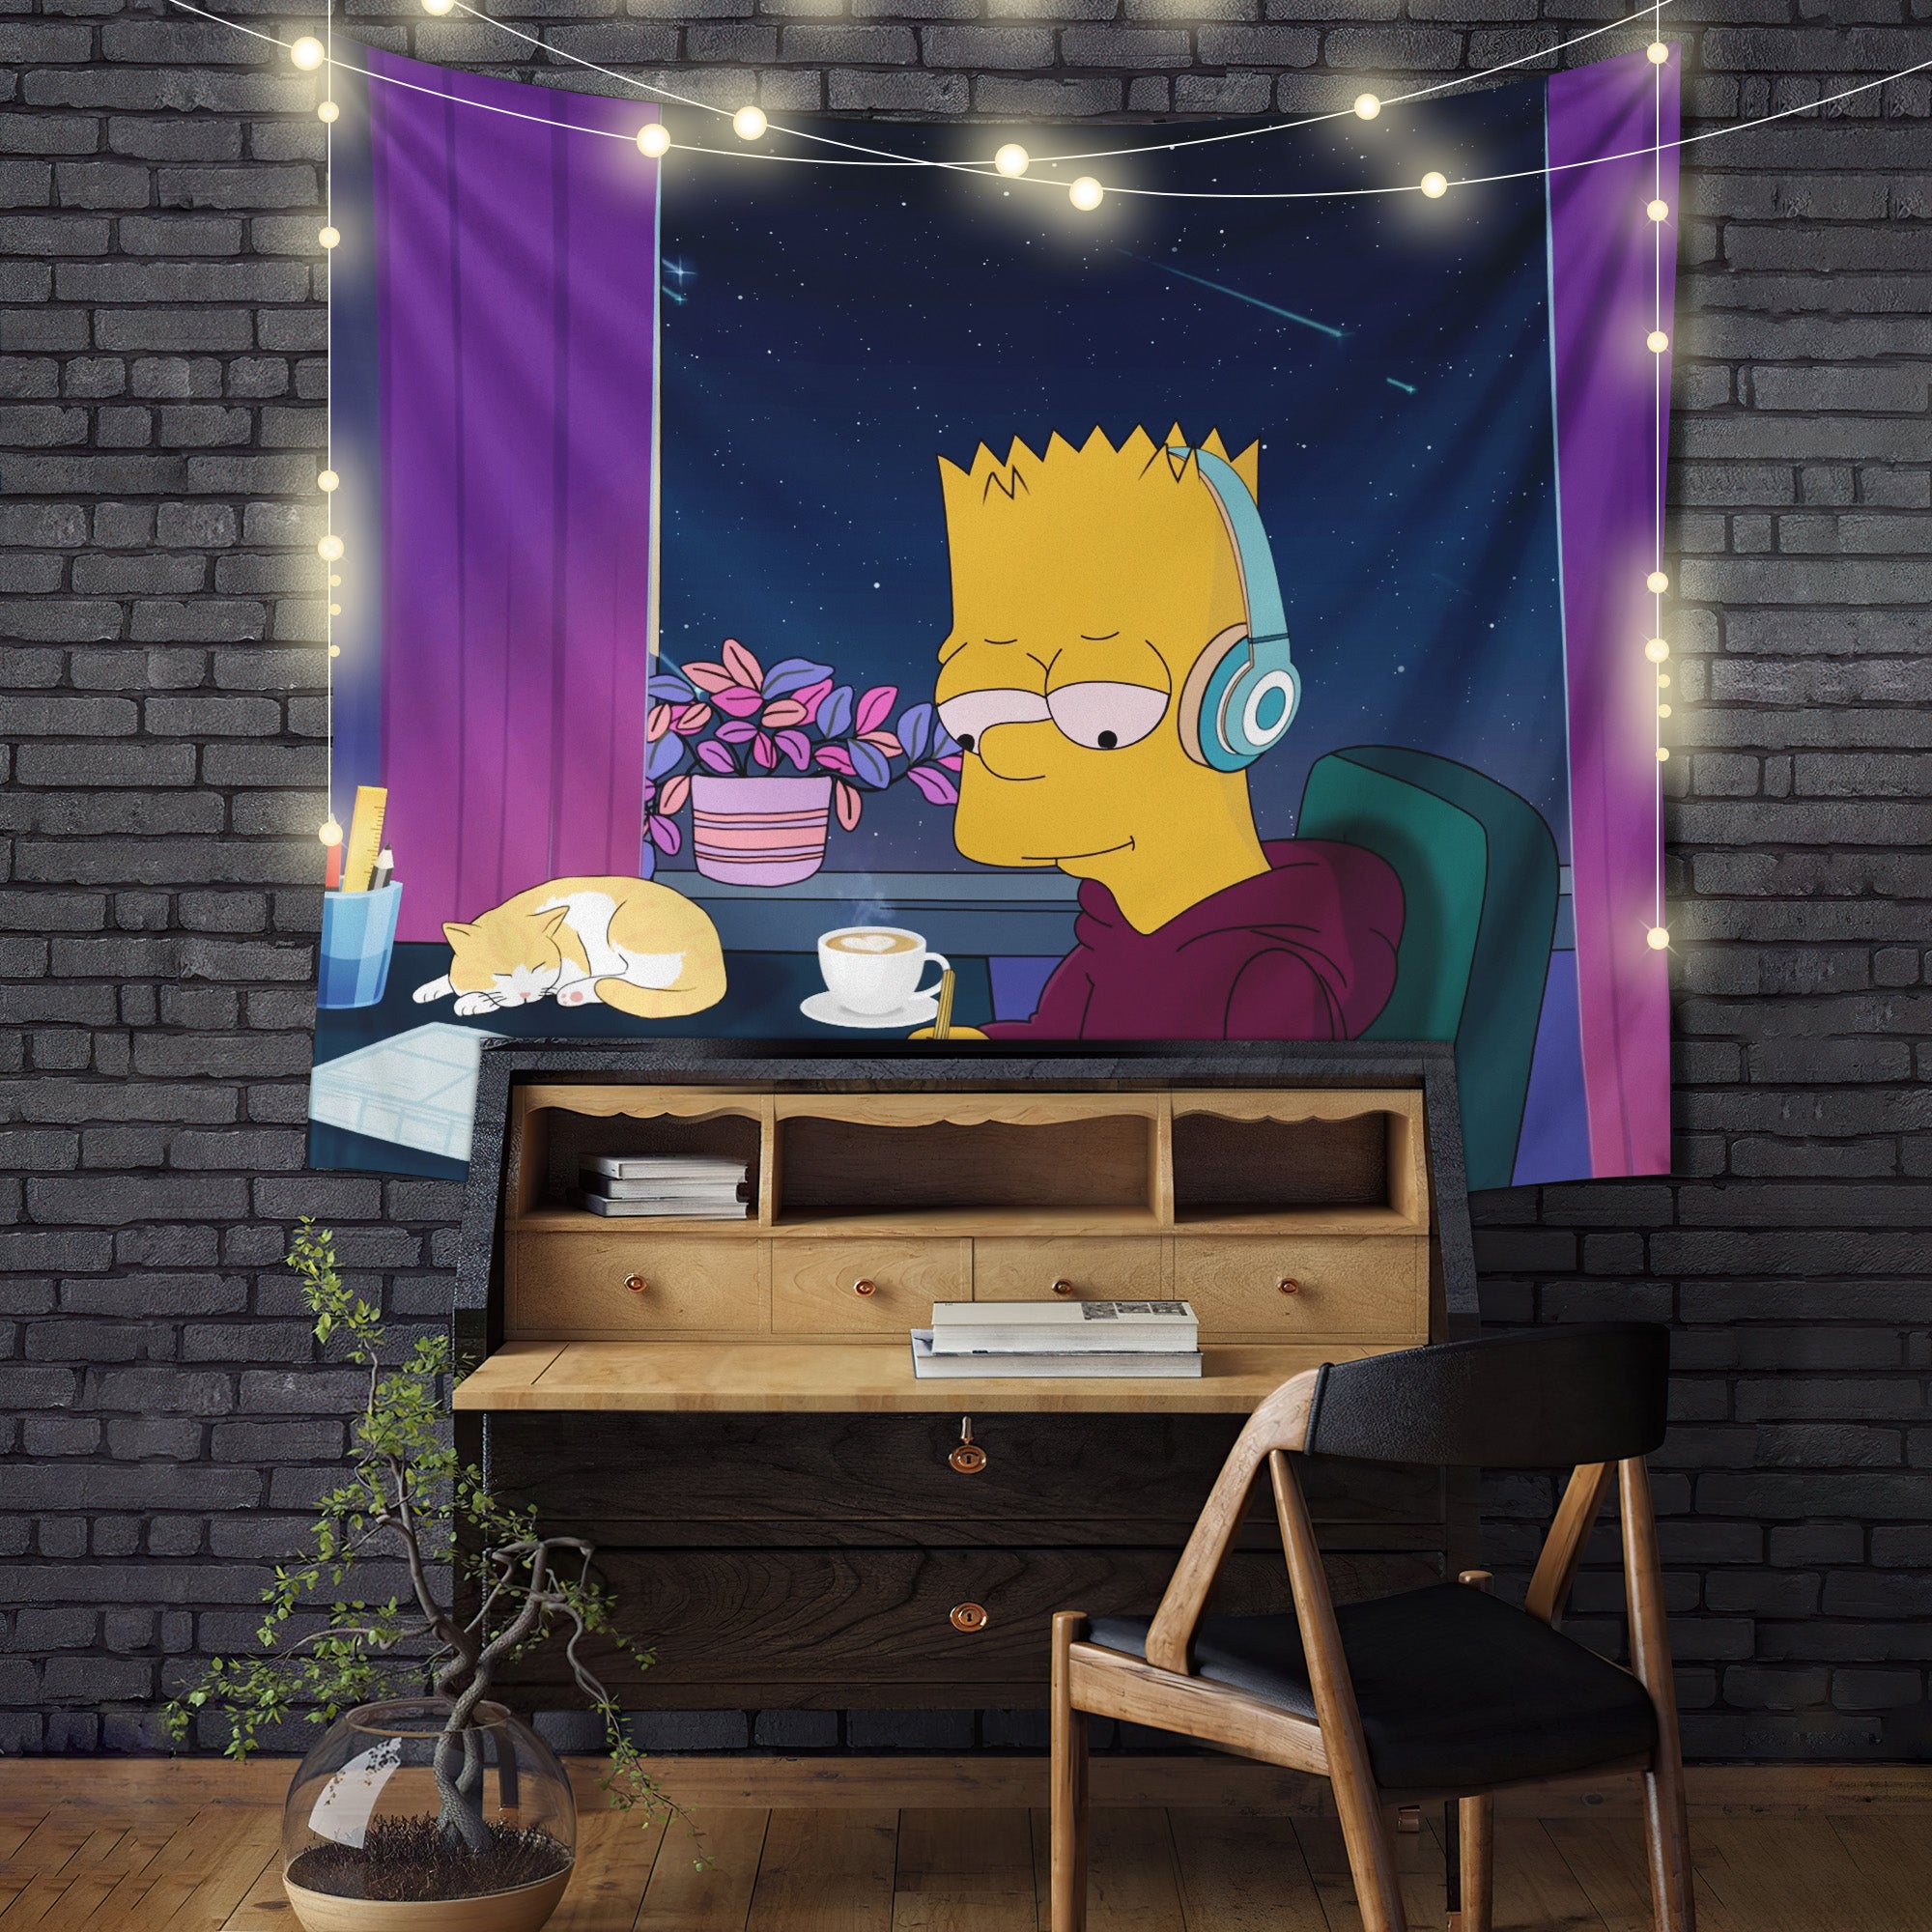 Simpsons Study Chill Tapestry Room Decor